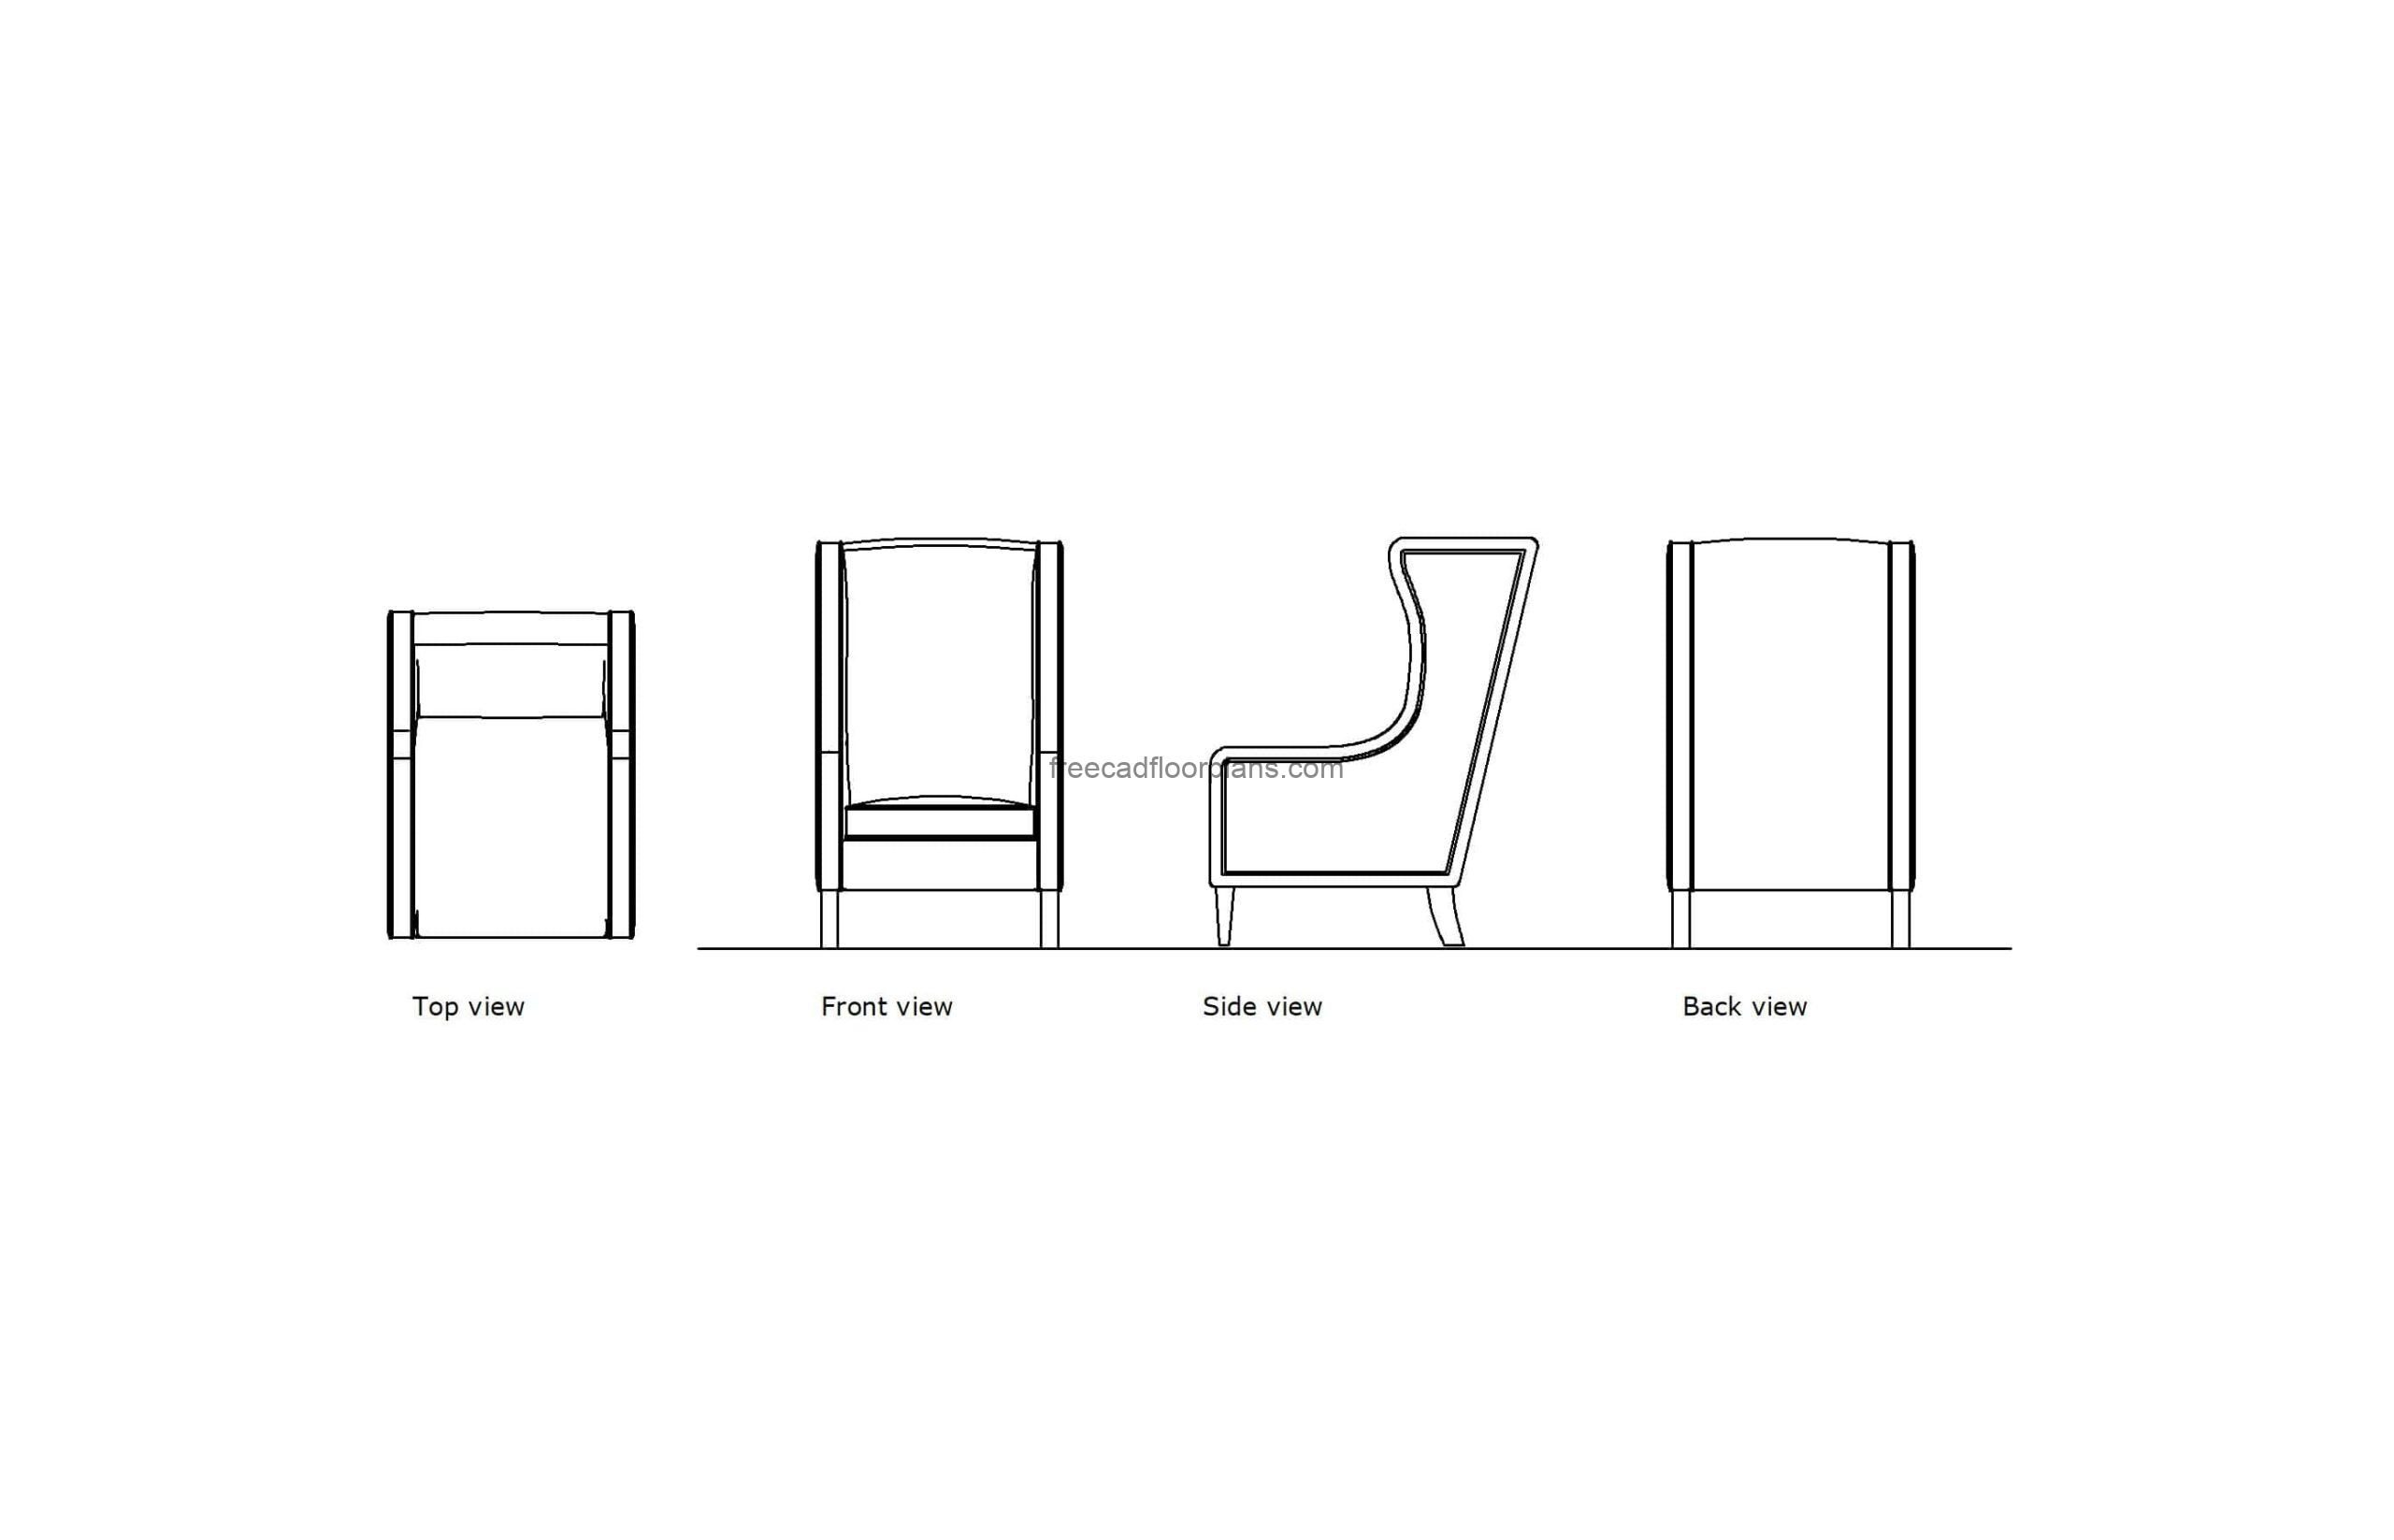 high back chair autocad drawing 2d views, plan and elevations dwg file for free download